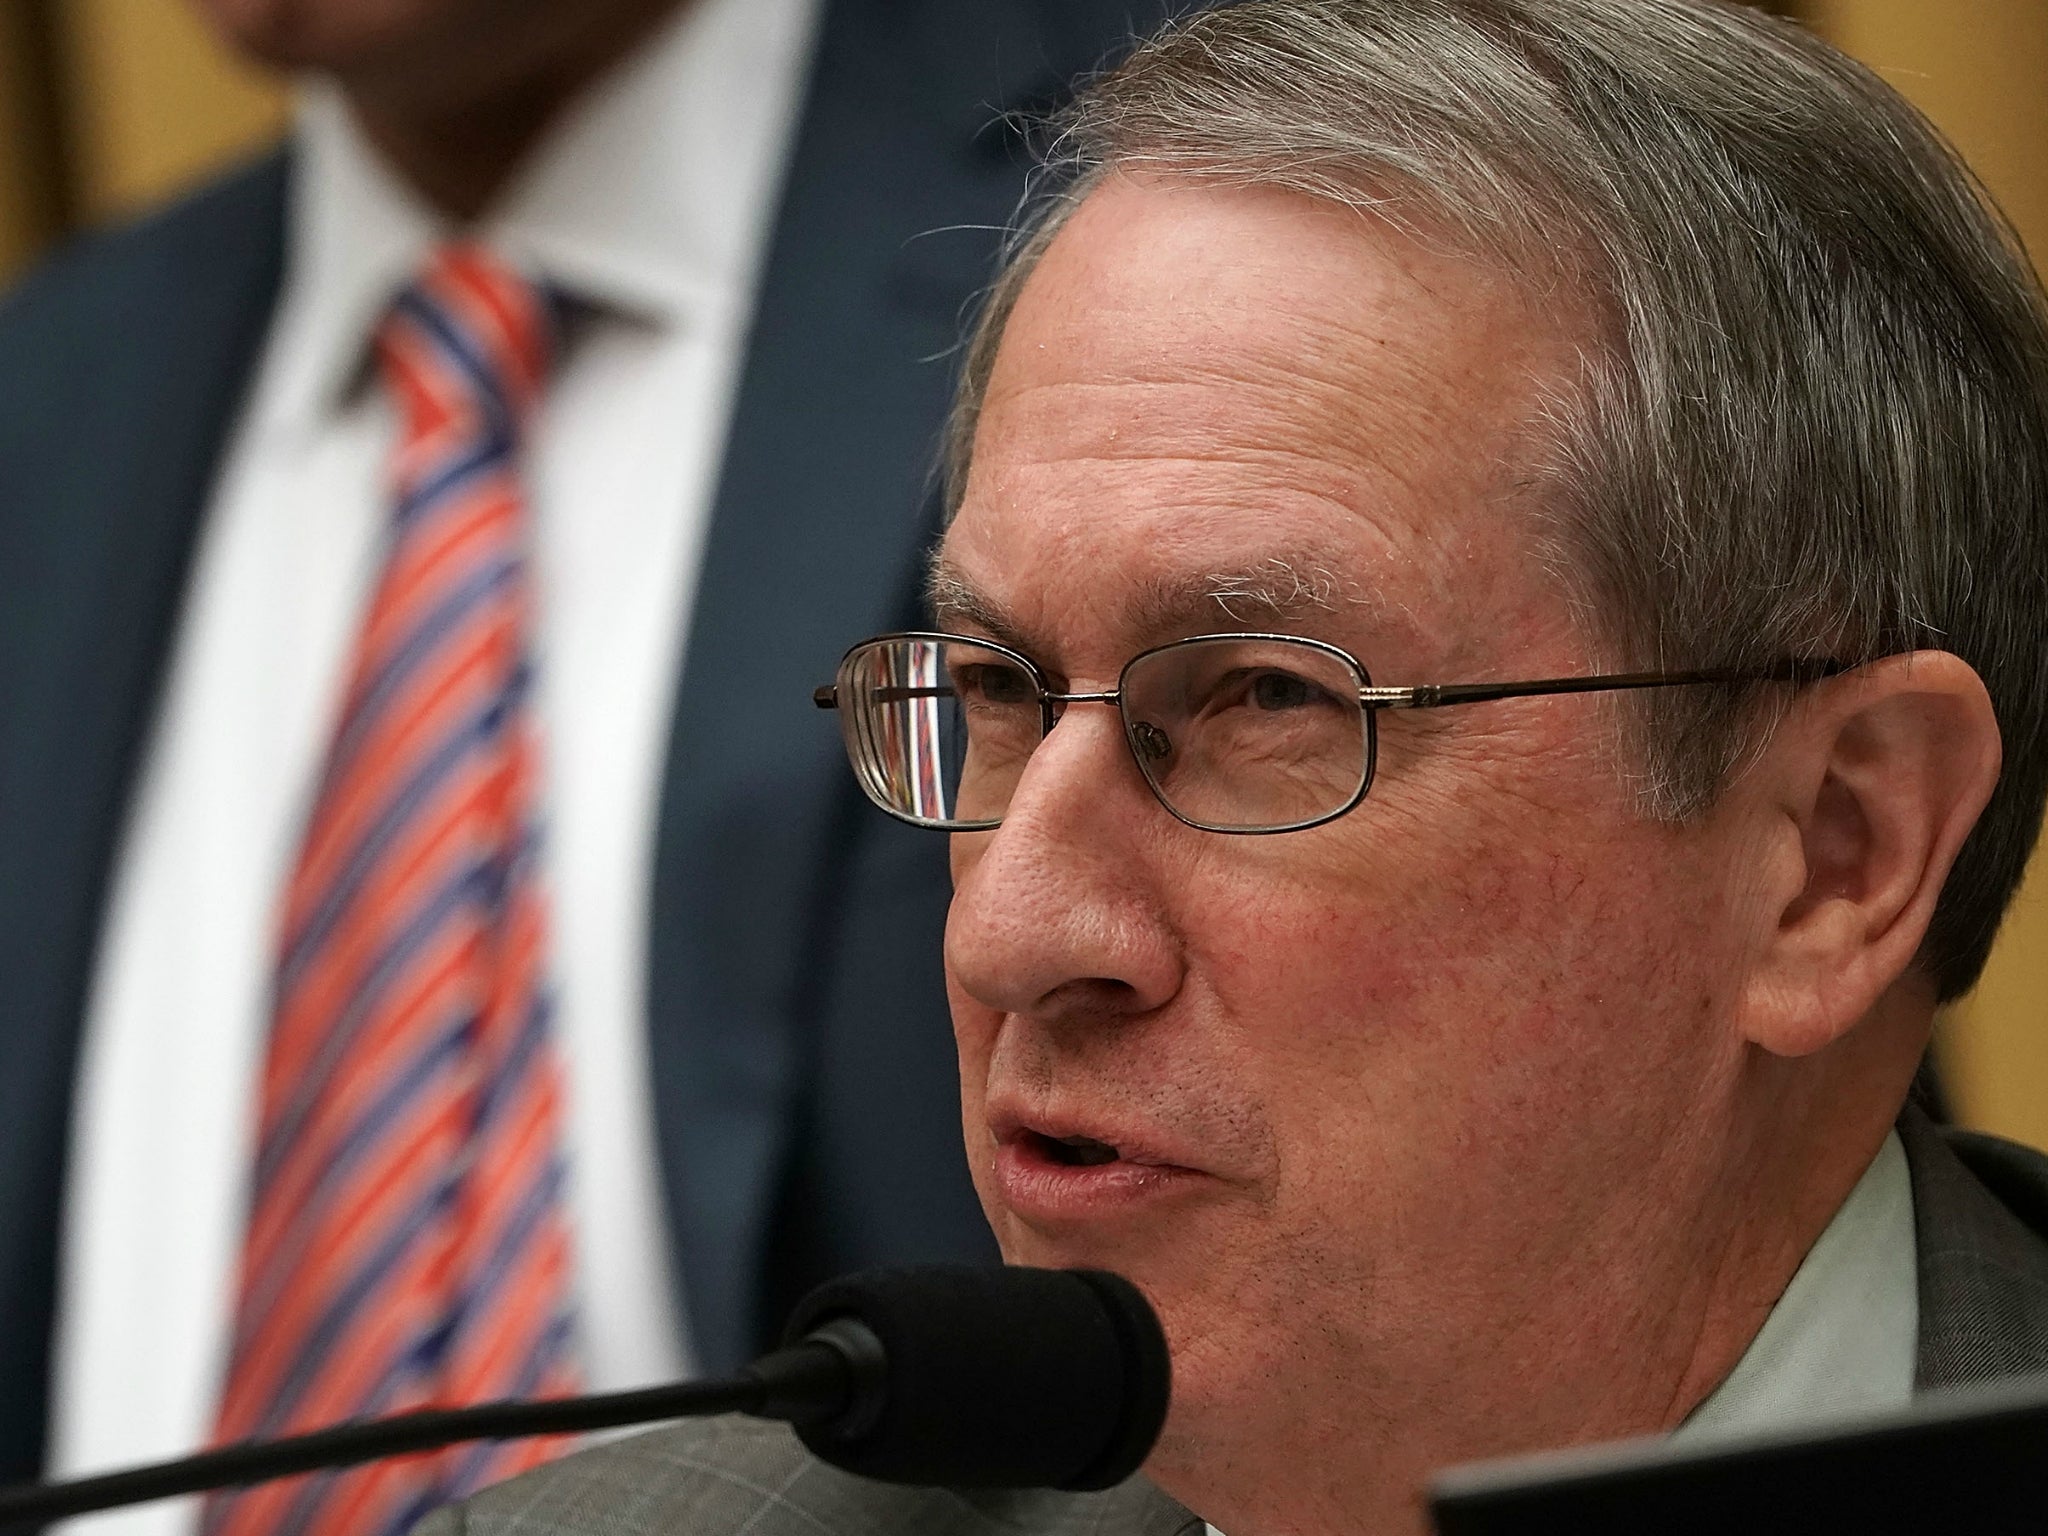 Republican House member Bob Goodlatte's son announced he gave the maximum donation allowed to the Democratic candidate running for his father's Congressional seat in Virginia